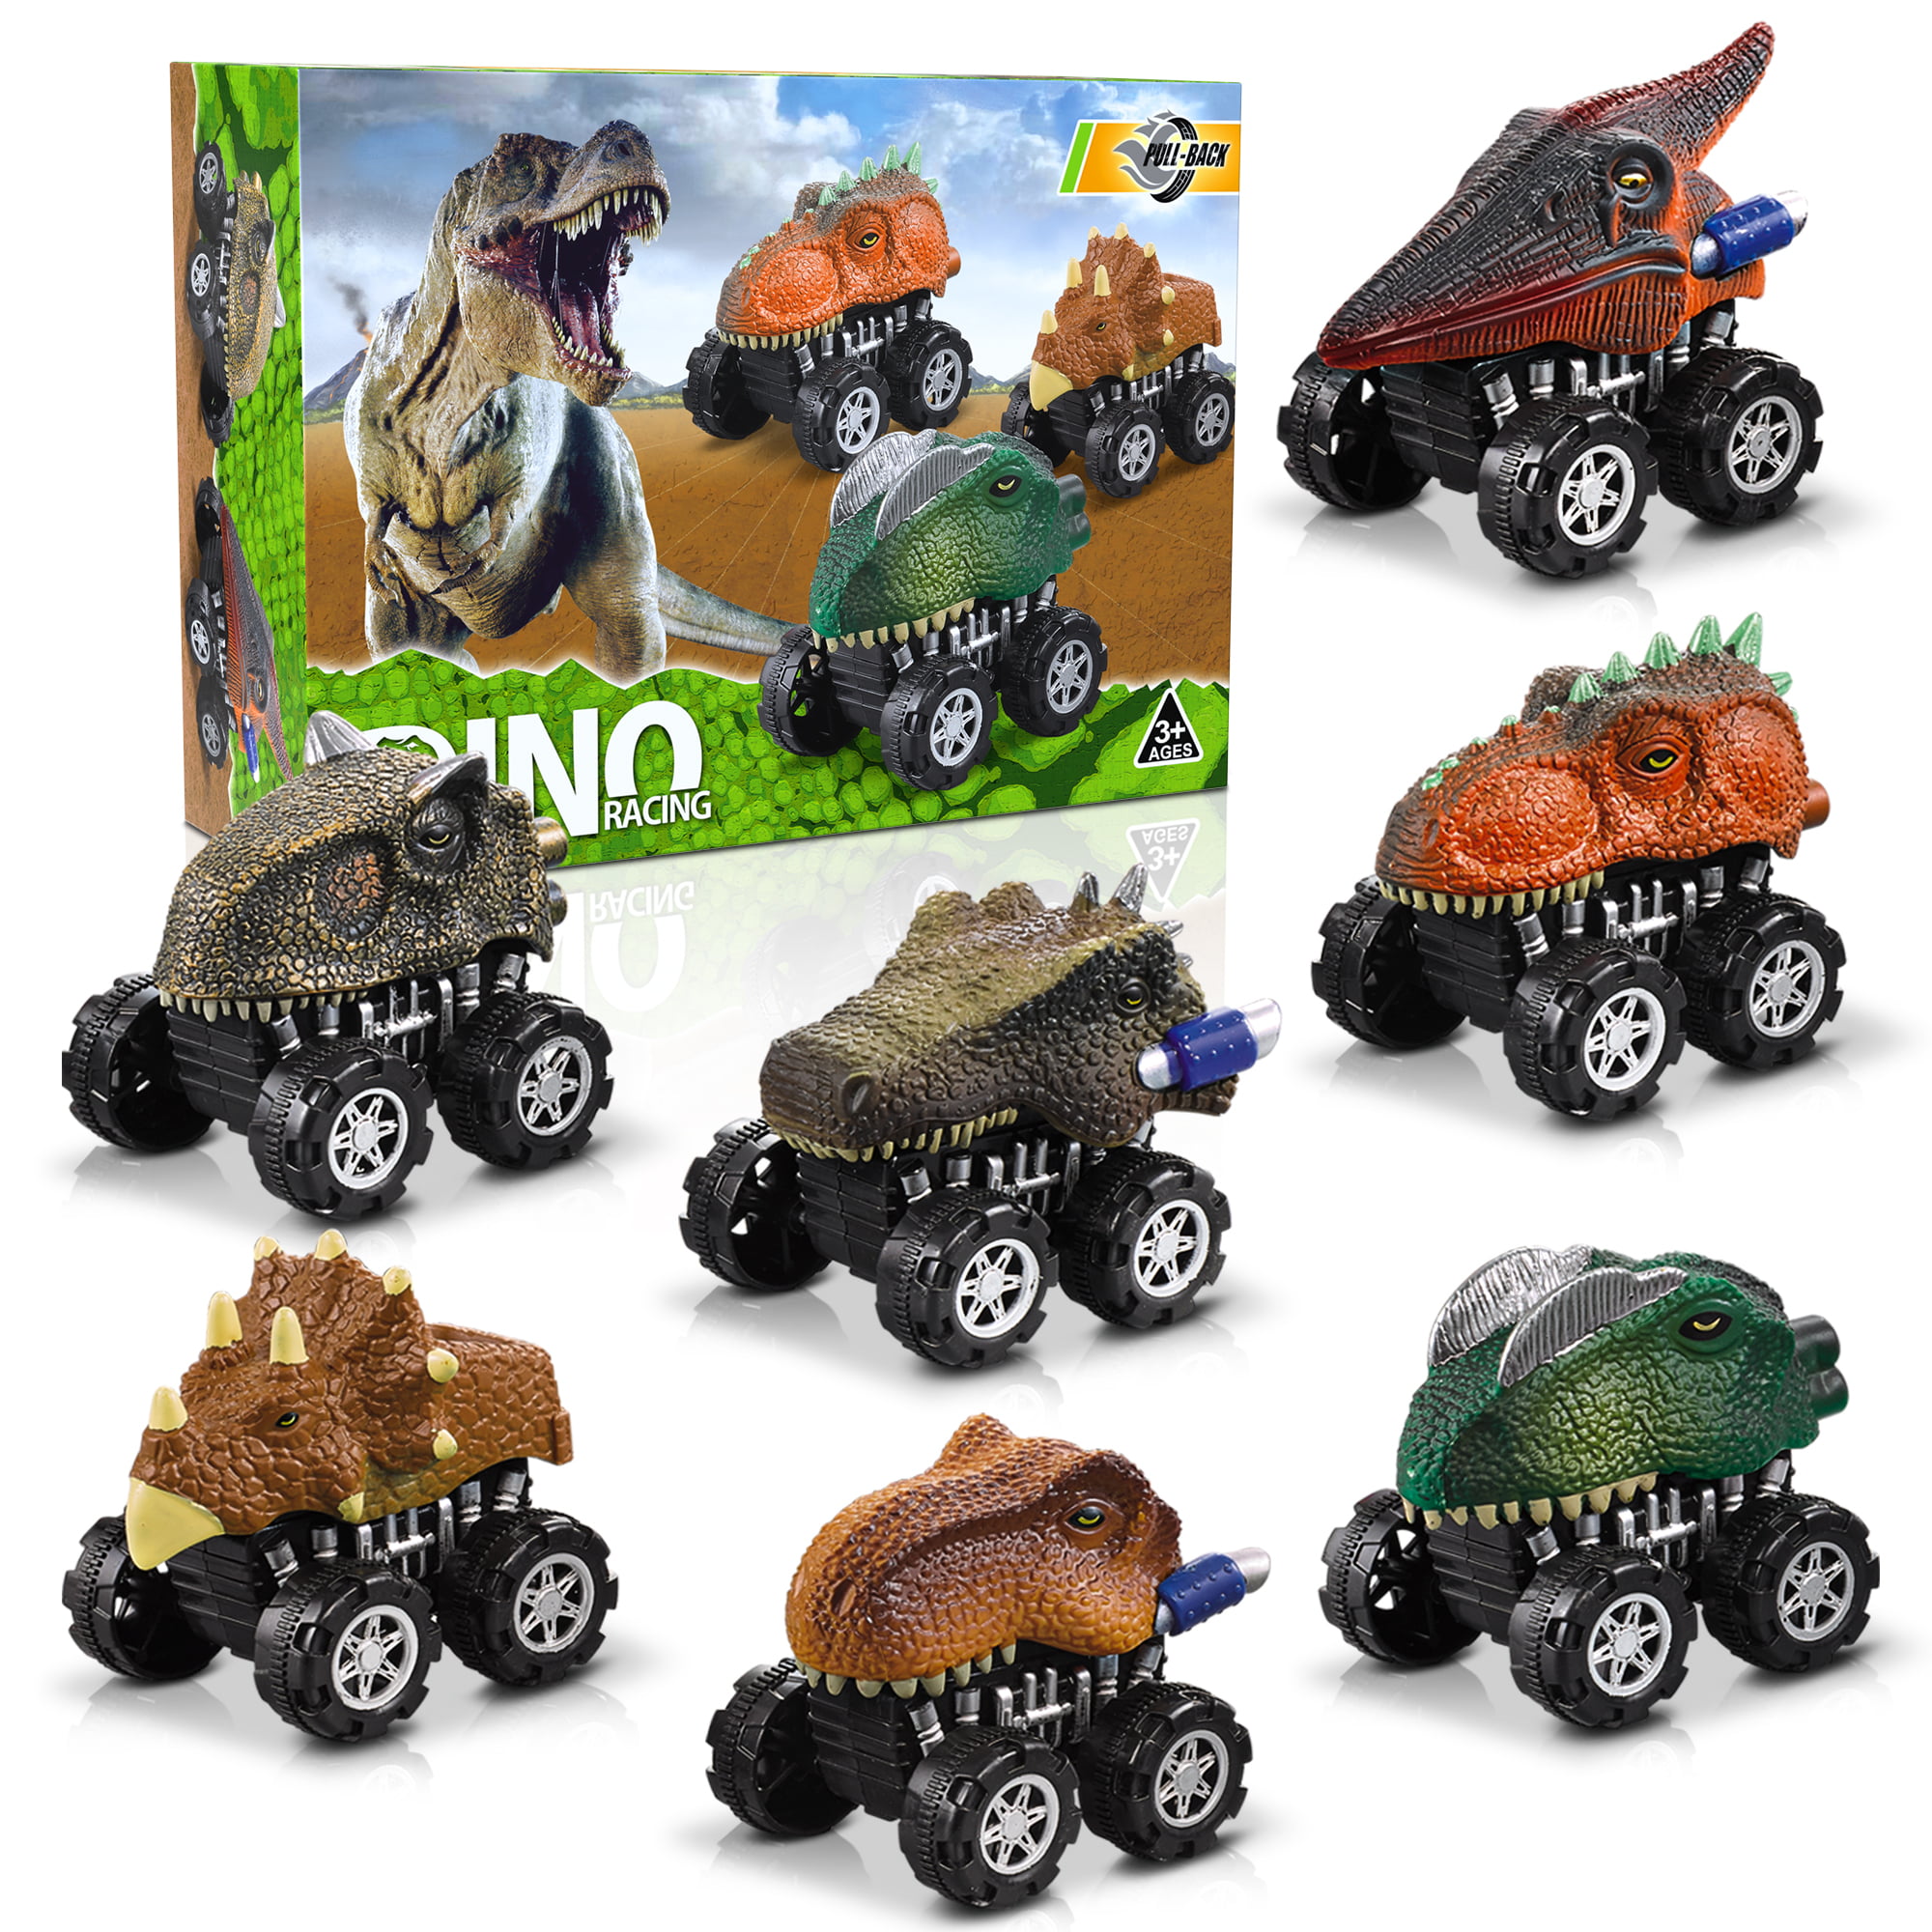 kecivnte Pull Back Original Dinosaur Cars 4-Pack Dino Cars Toys with Big Tire Wheel for 3-14 Year Old Boys Girls Creative Gifts for Kids Animal Vehicles for Kids Party Favors